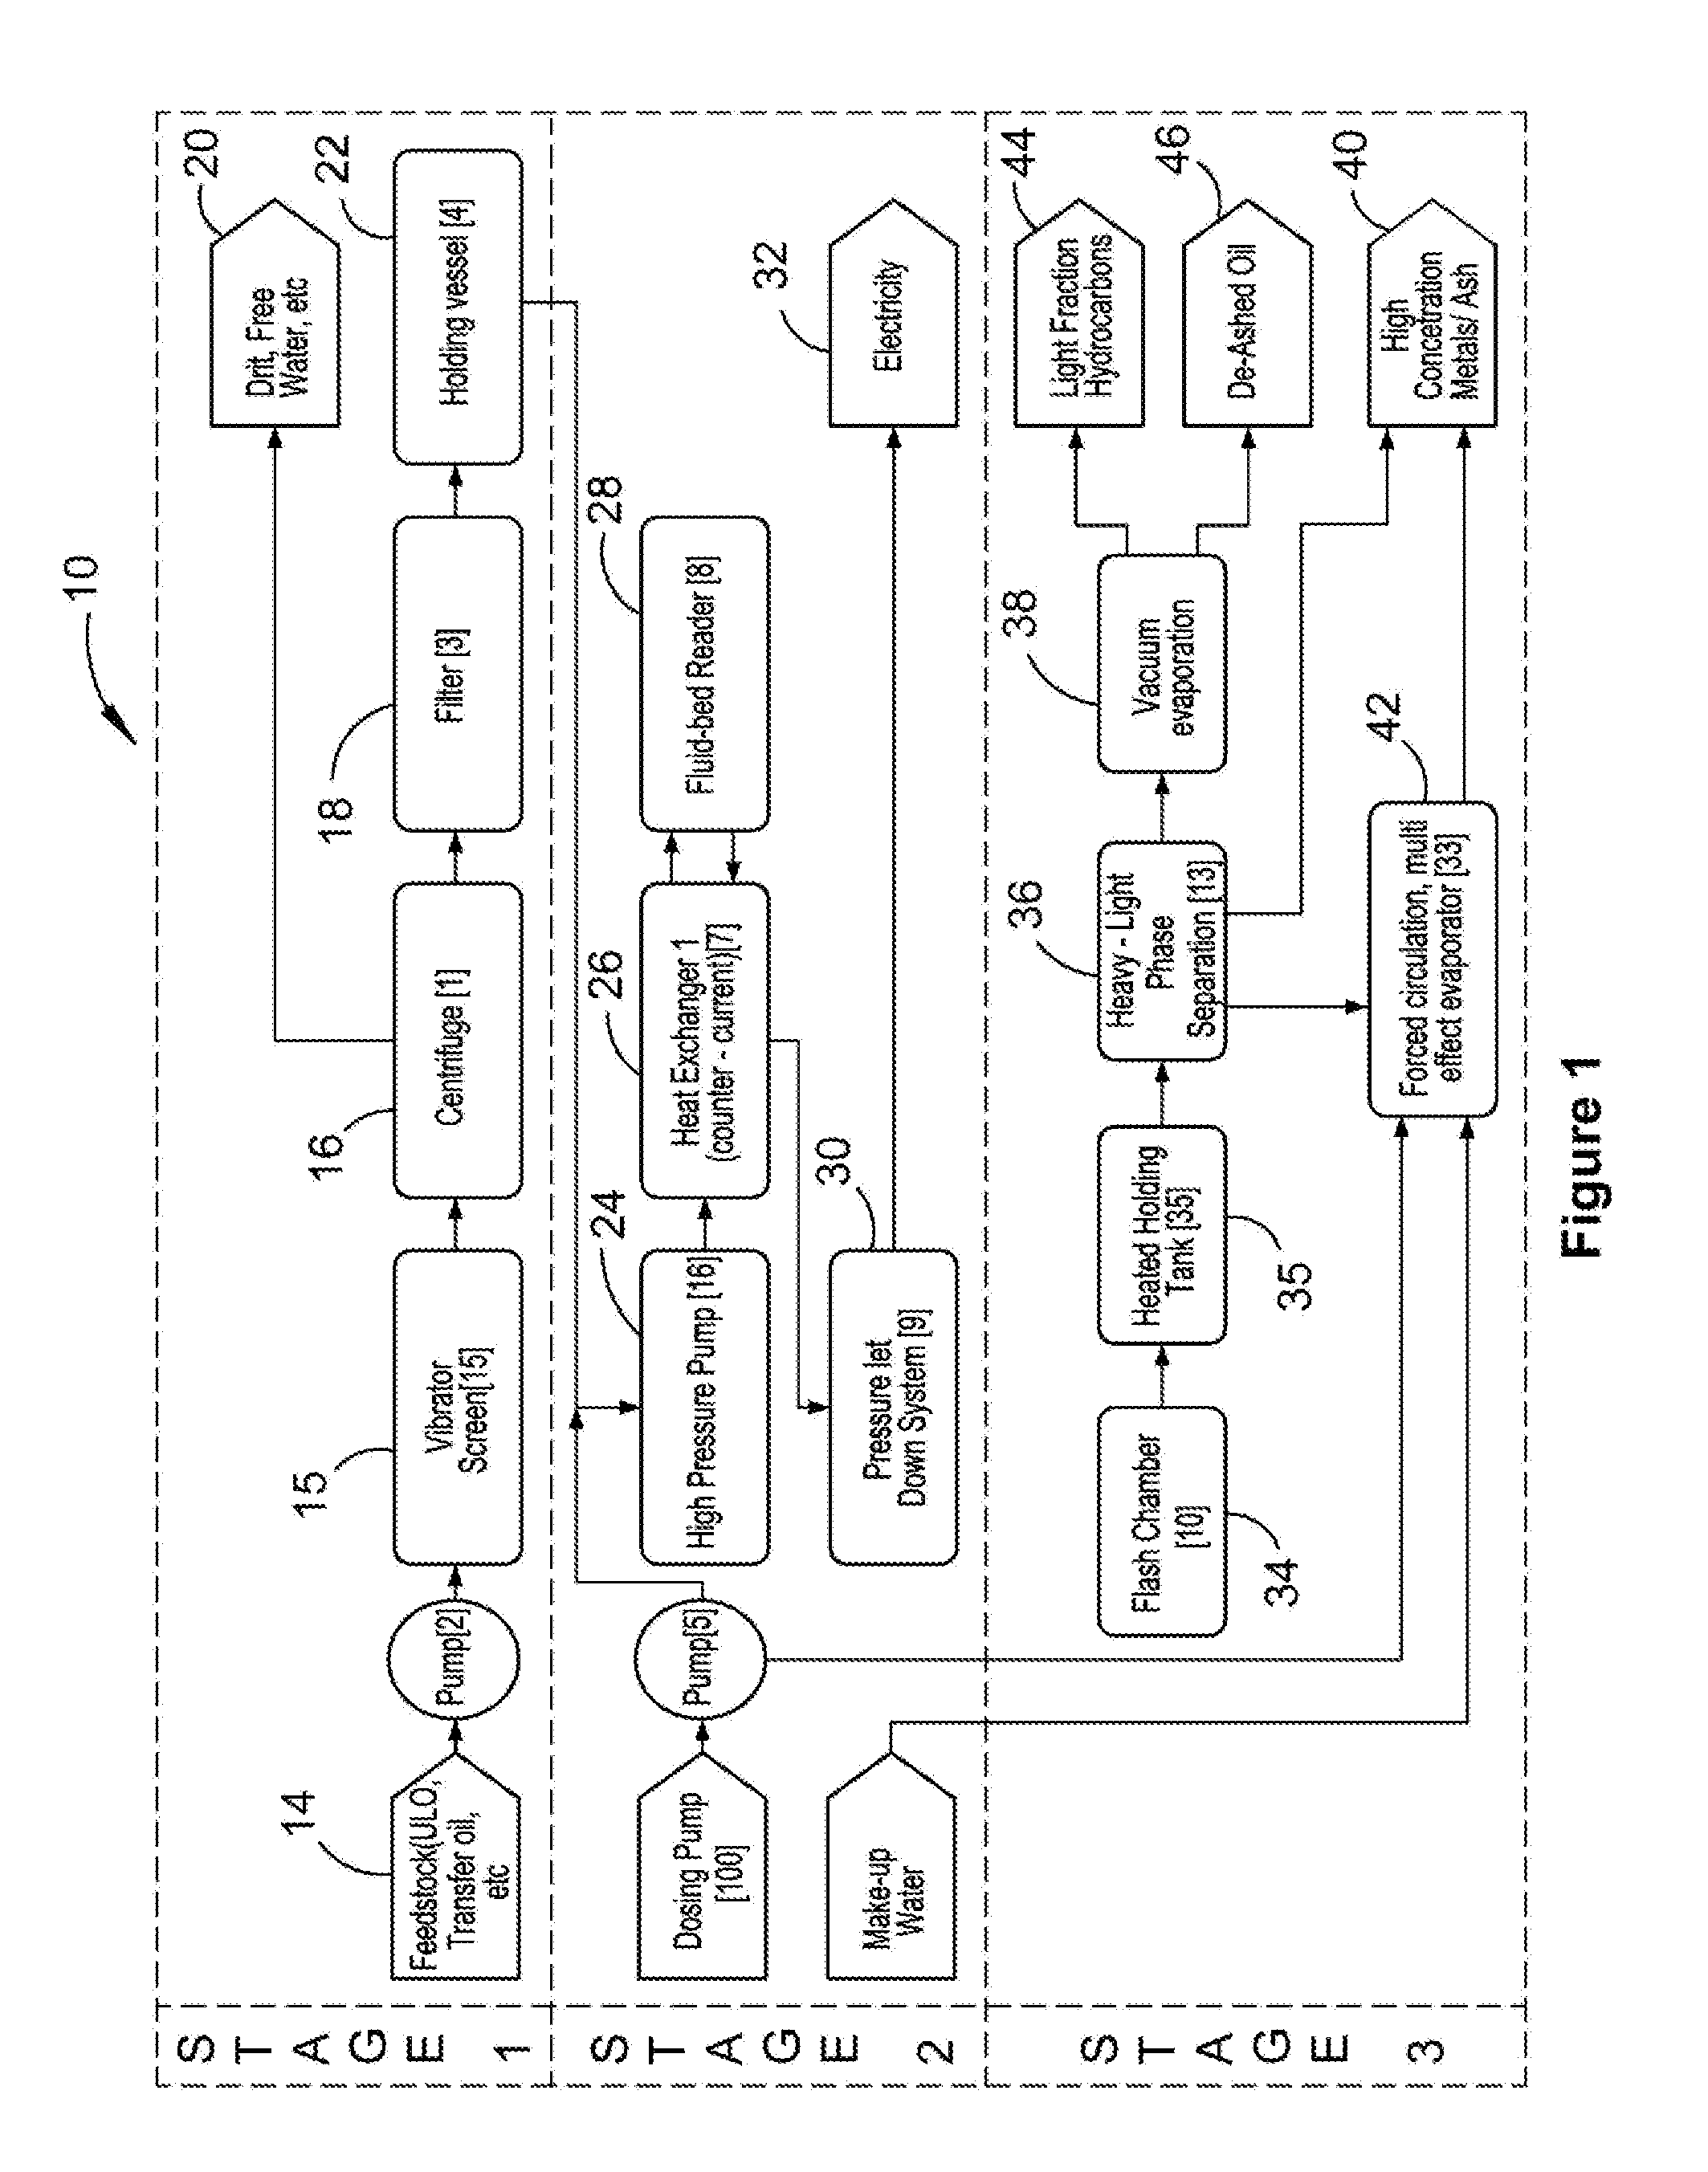 Method and apparatus for upgrading a hydrocarbon